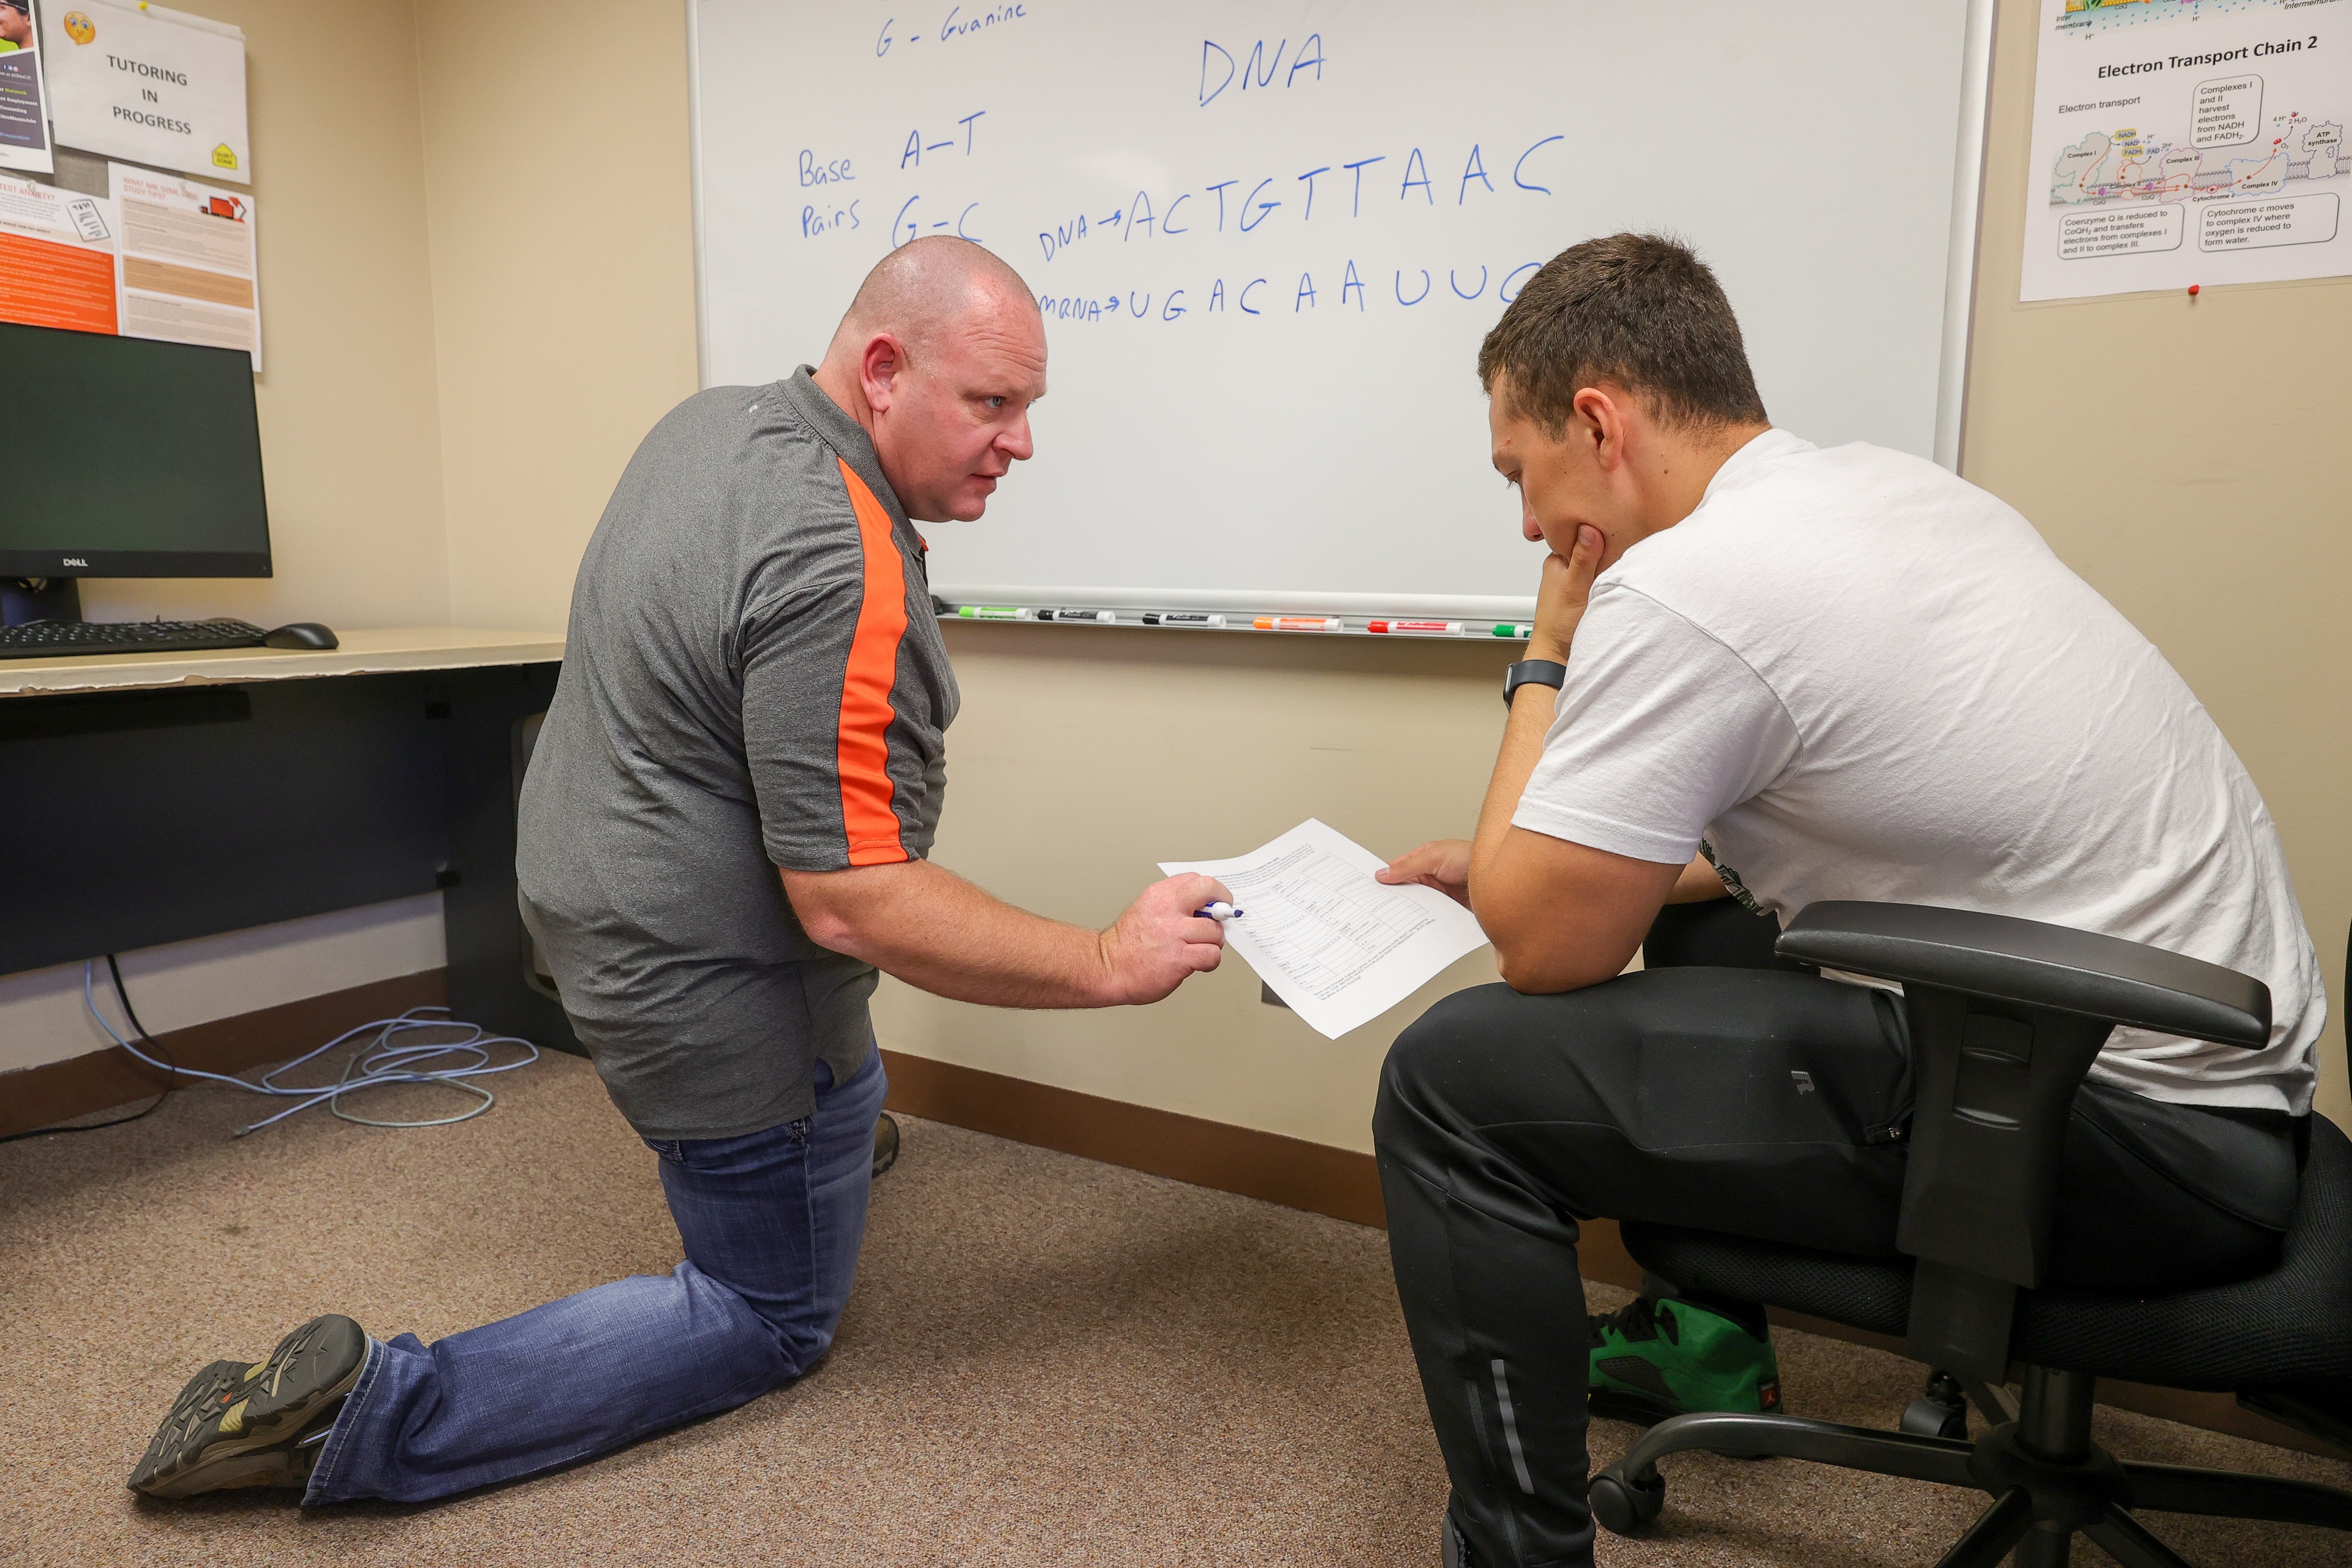 Jason Kaylor kneeling on one knee pointing at a paper someone is holding